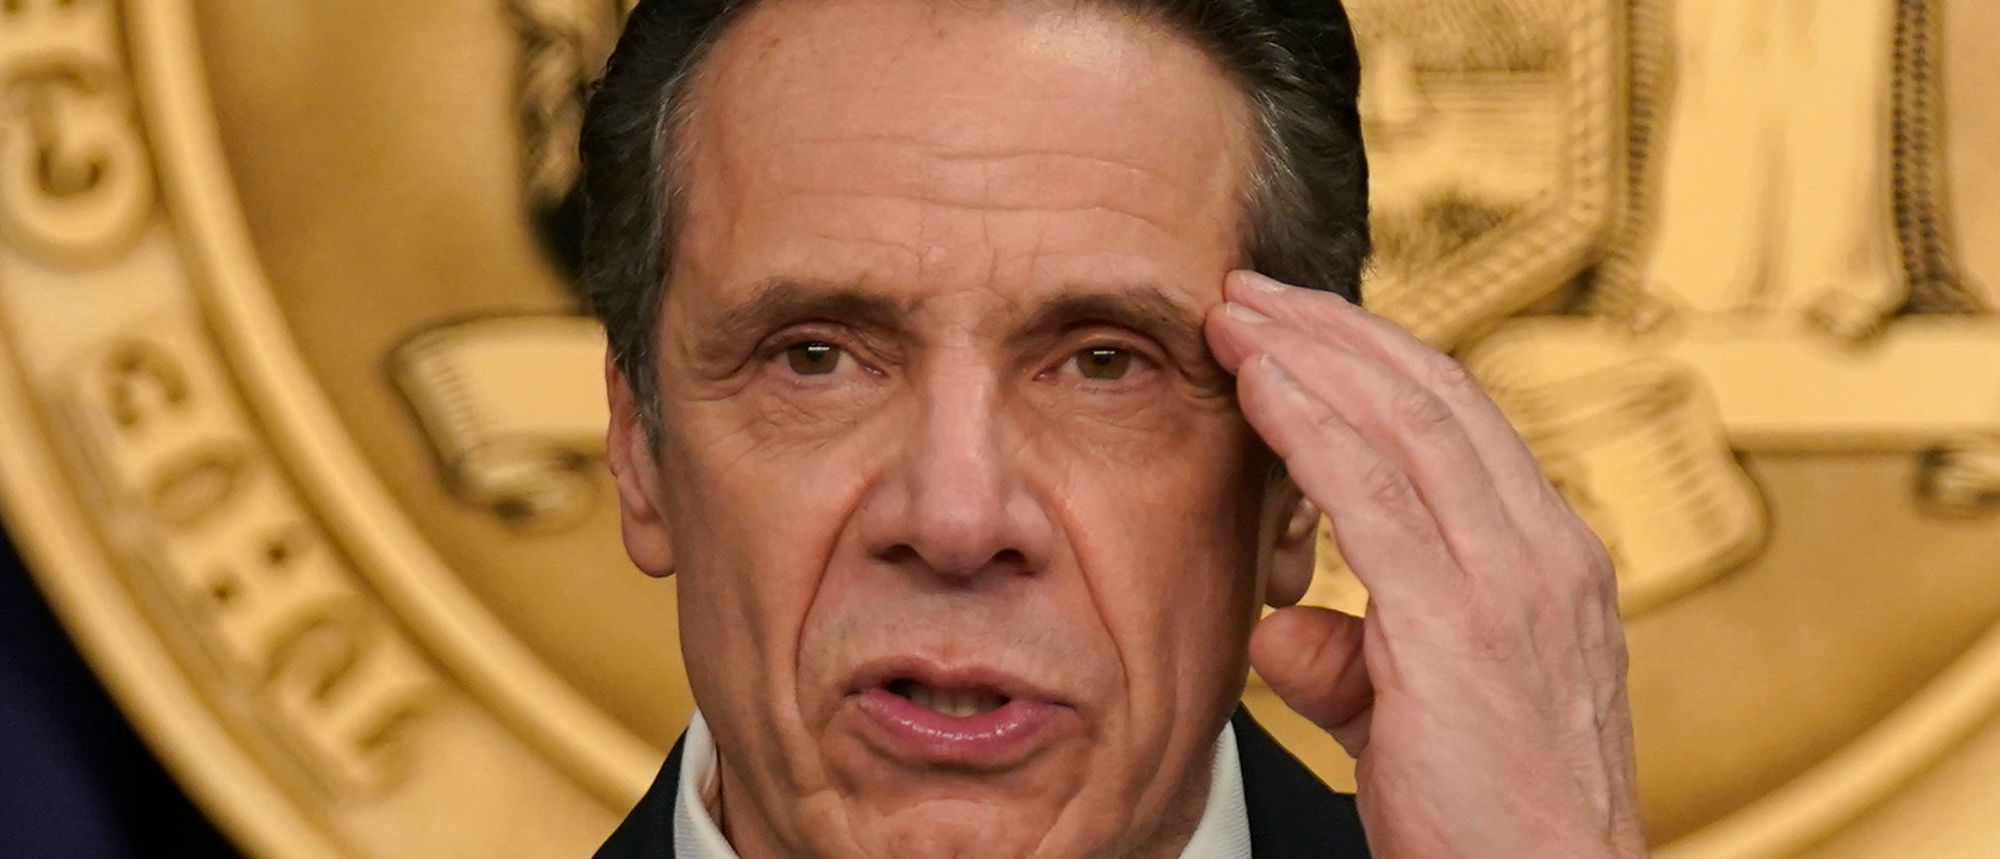 'People Are Jealous': Cuomo Says His Accusers 'Just Want ...